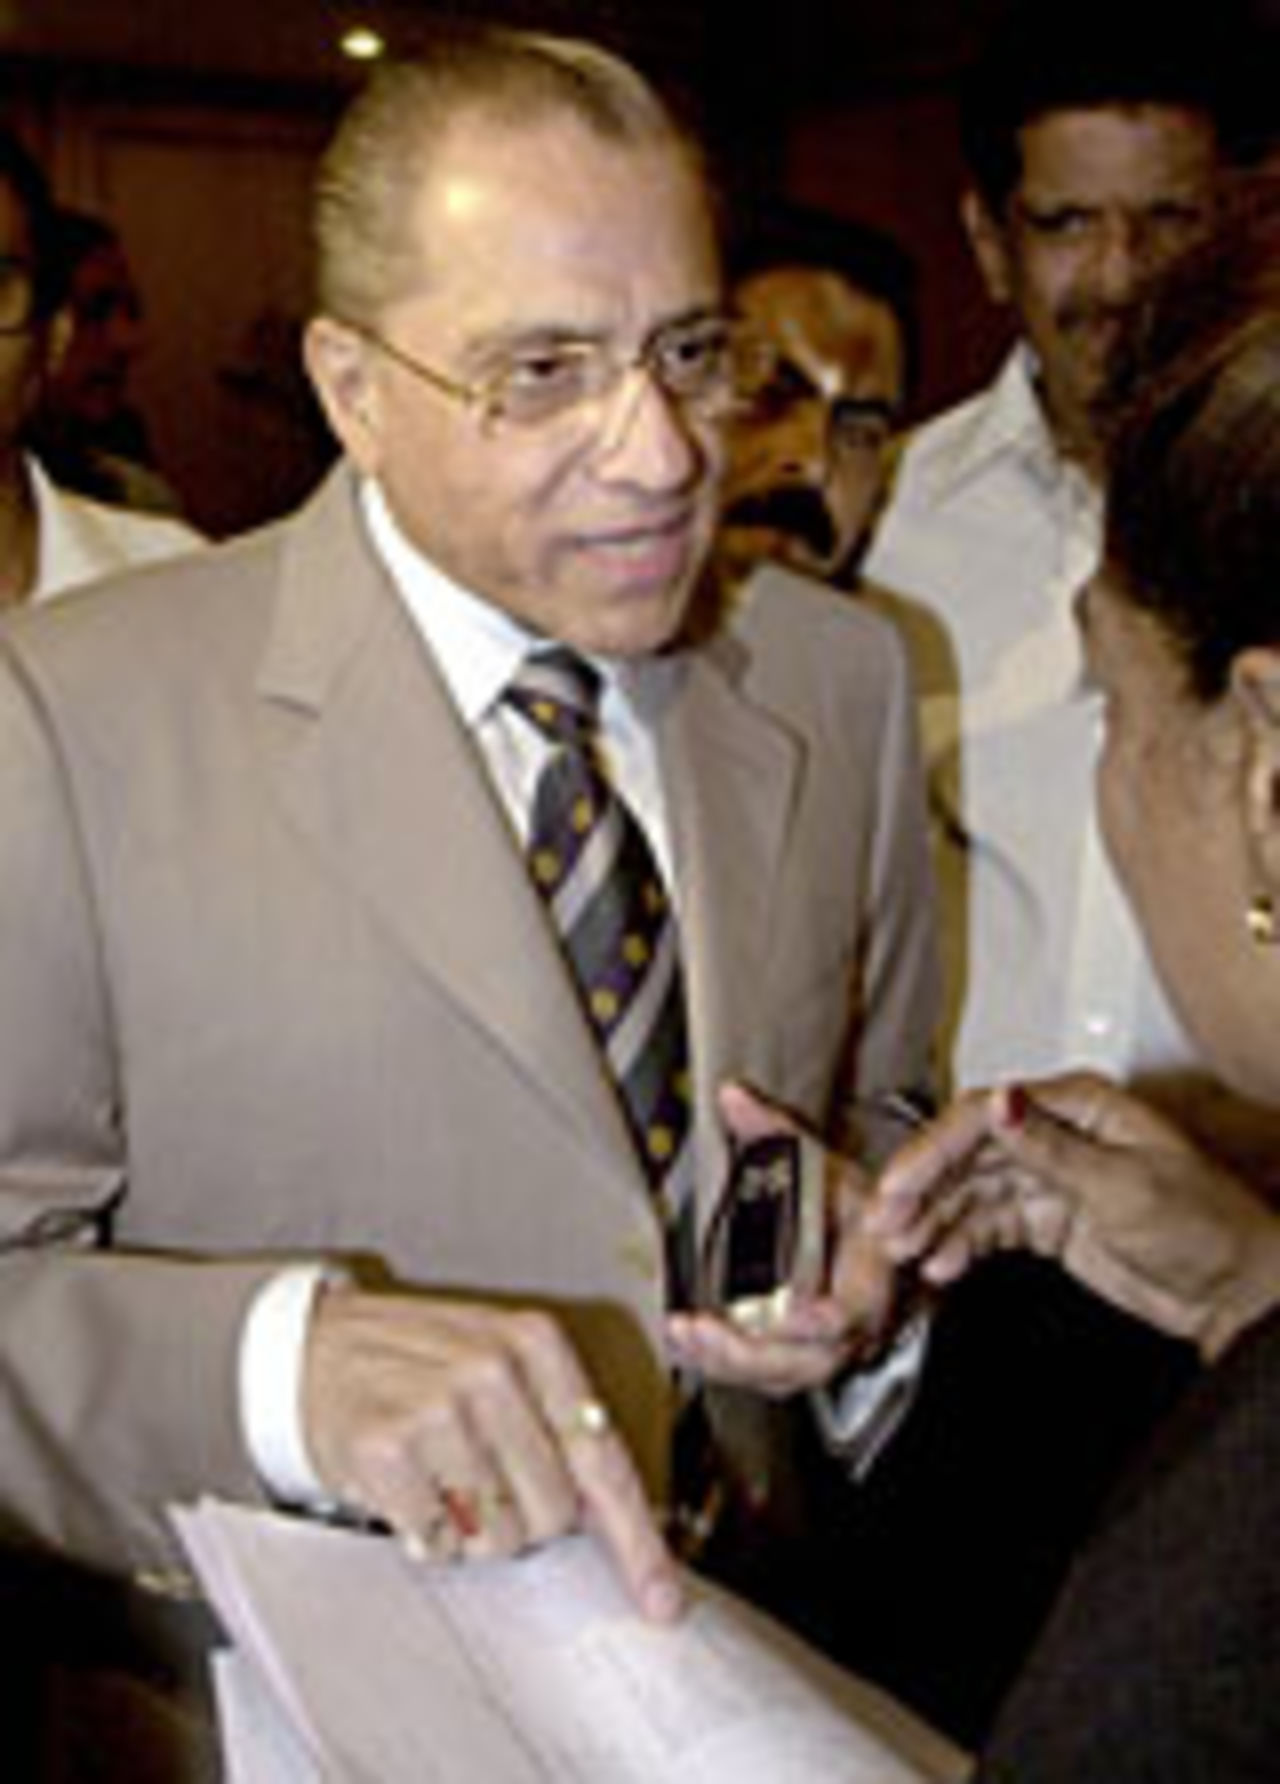 Jagmohan Dalmiya speaks with his lawyer during a BCCI meeting, Chennai, September 12, 2004